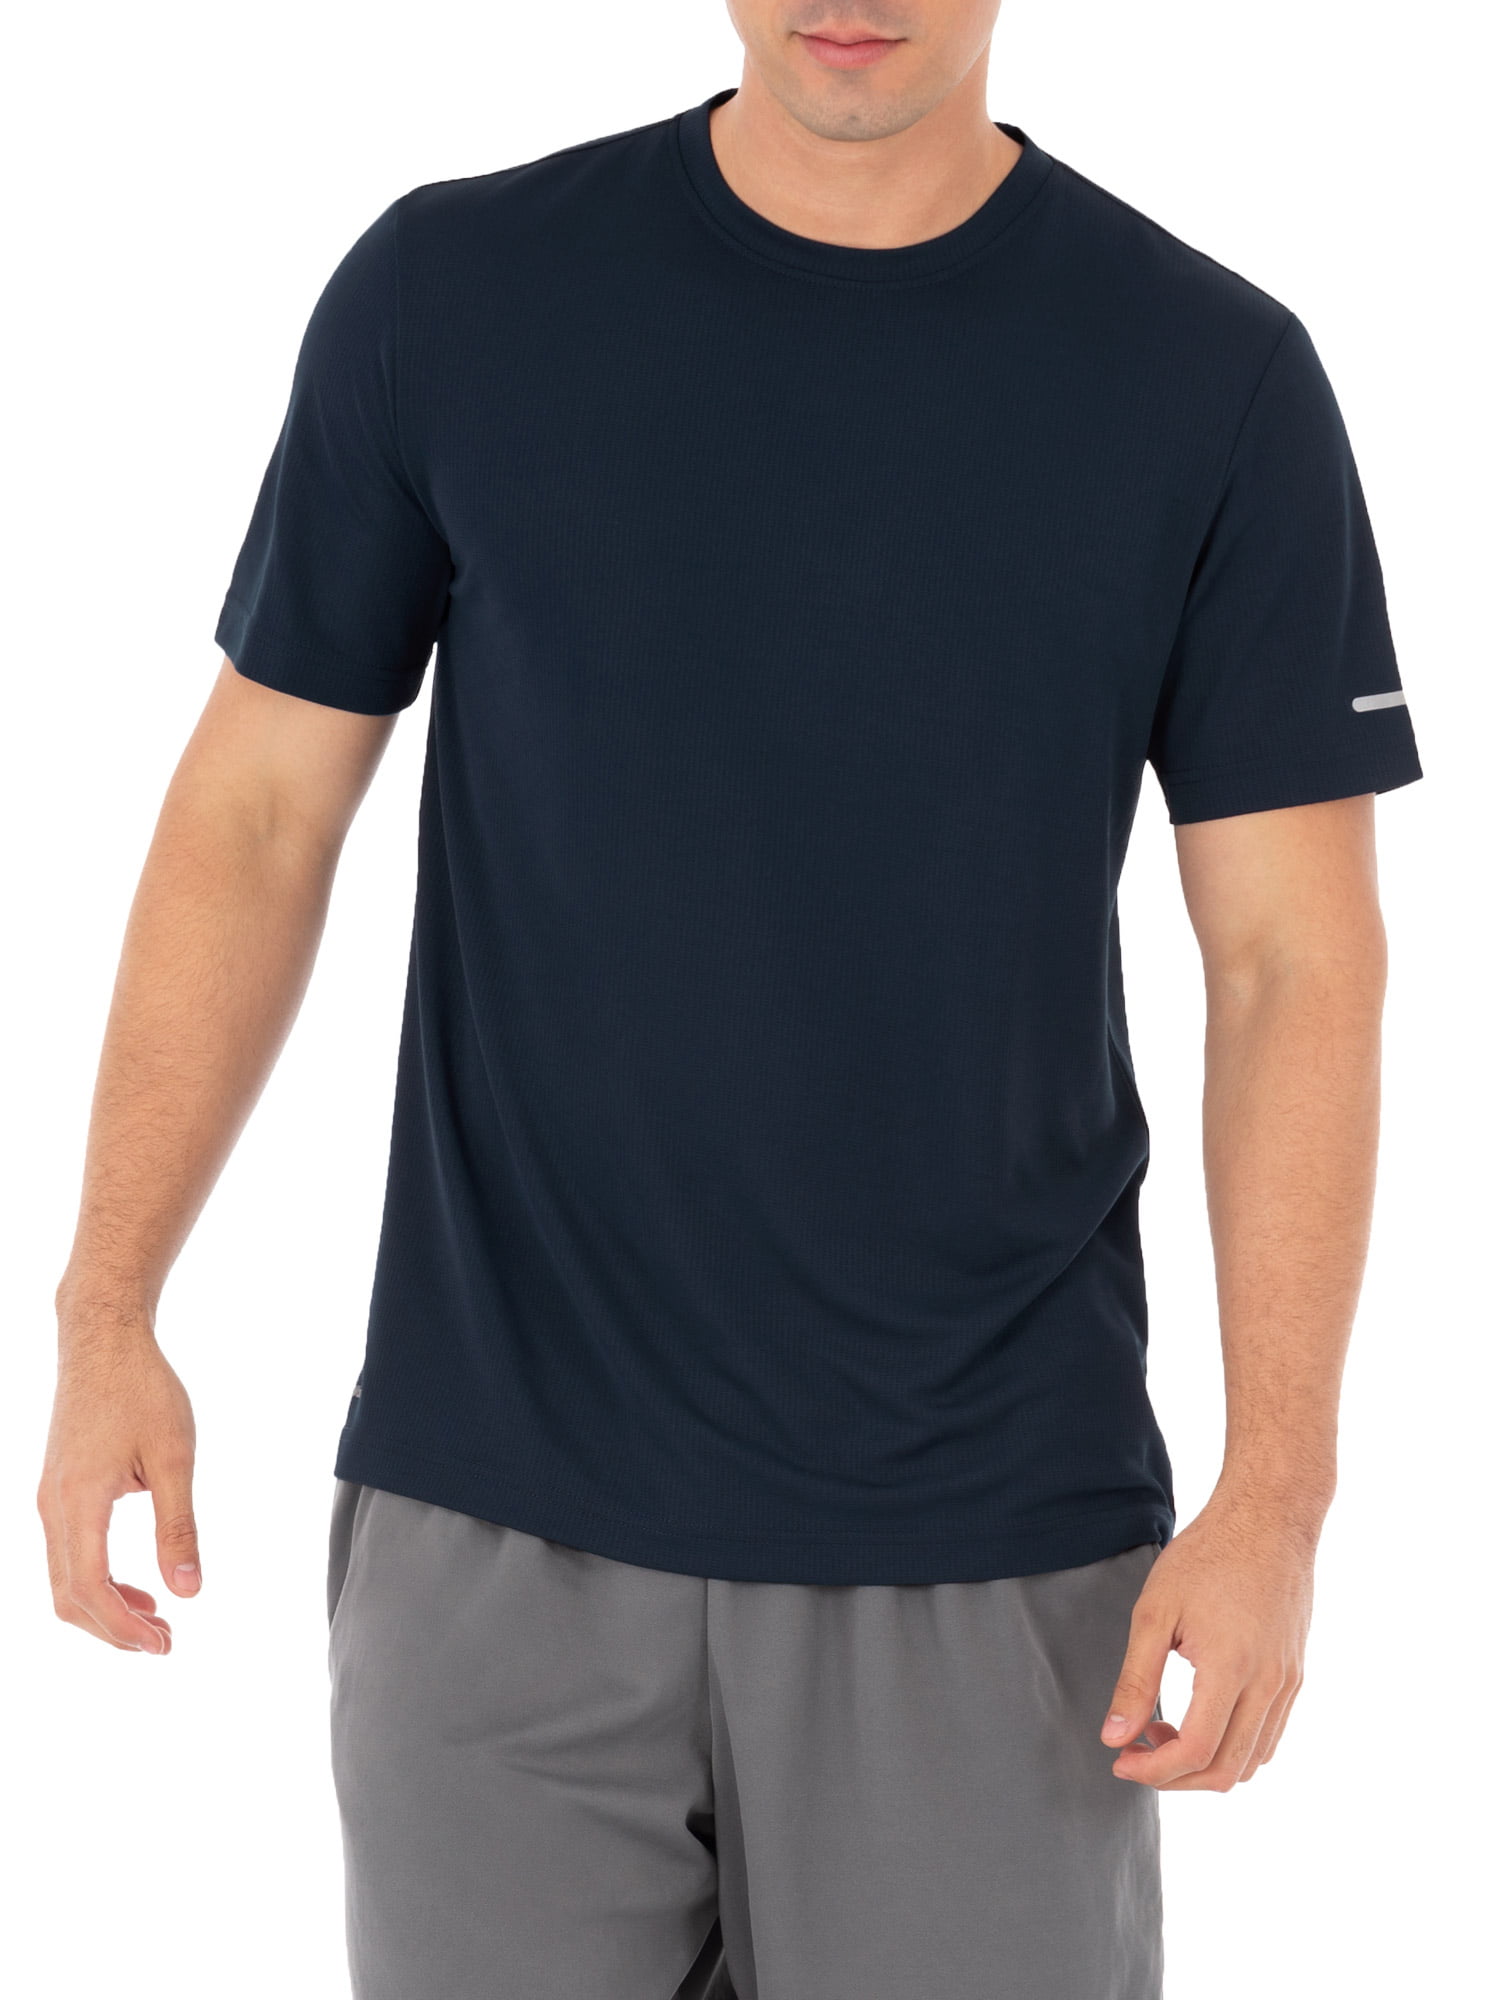 athletic works quick dry tee 3xl